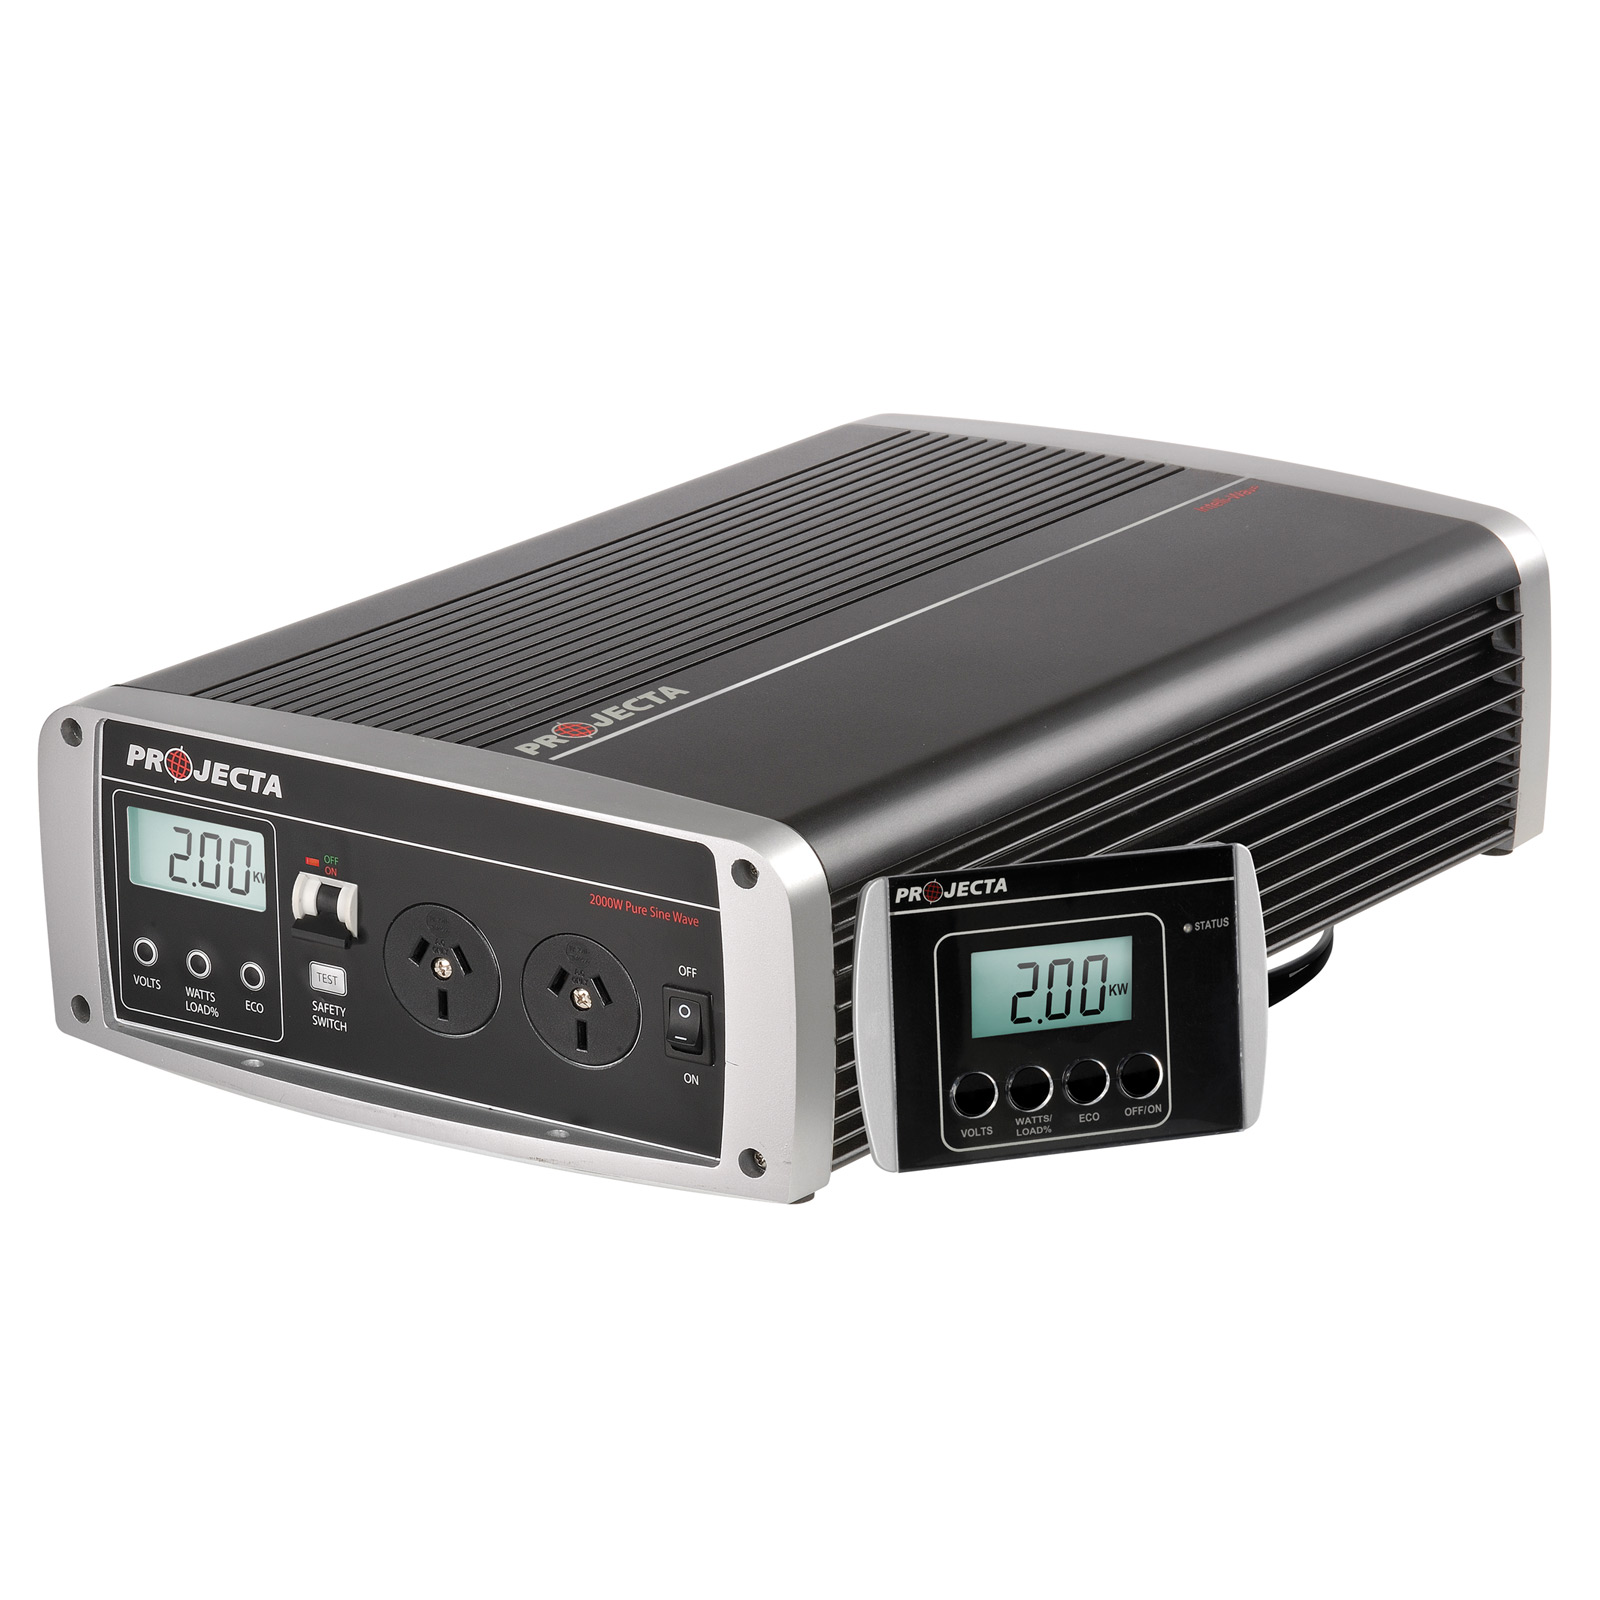 PROJECTA INTELLI-WAVE 2000W Pure Sine Inverter Features Eco Mode, RCD and AC Transfer Switch 